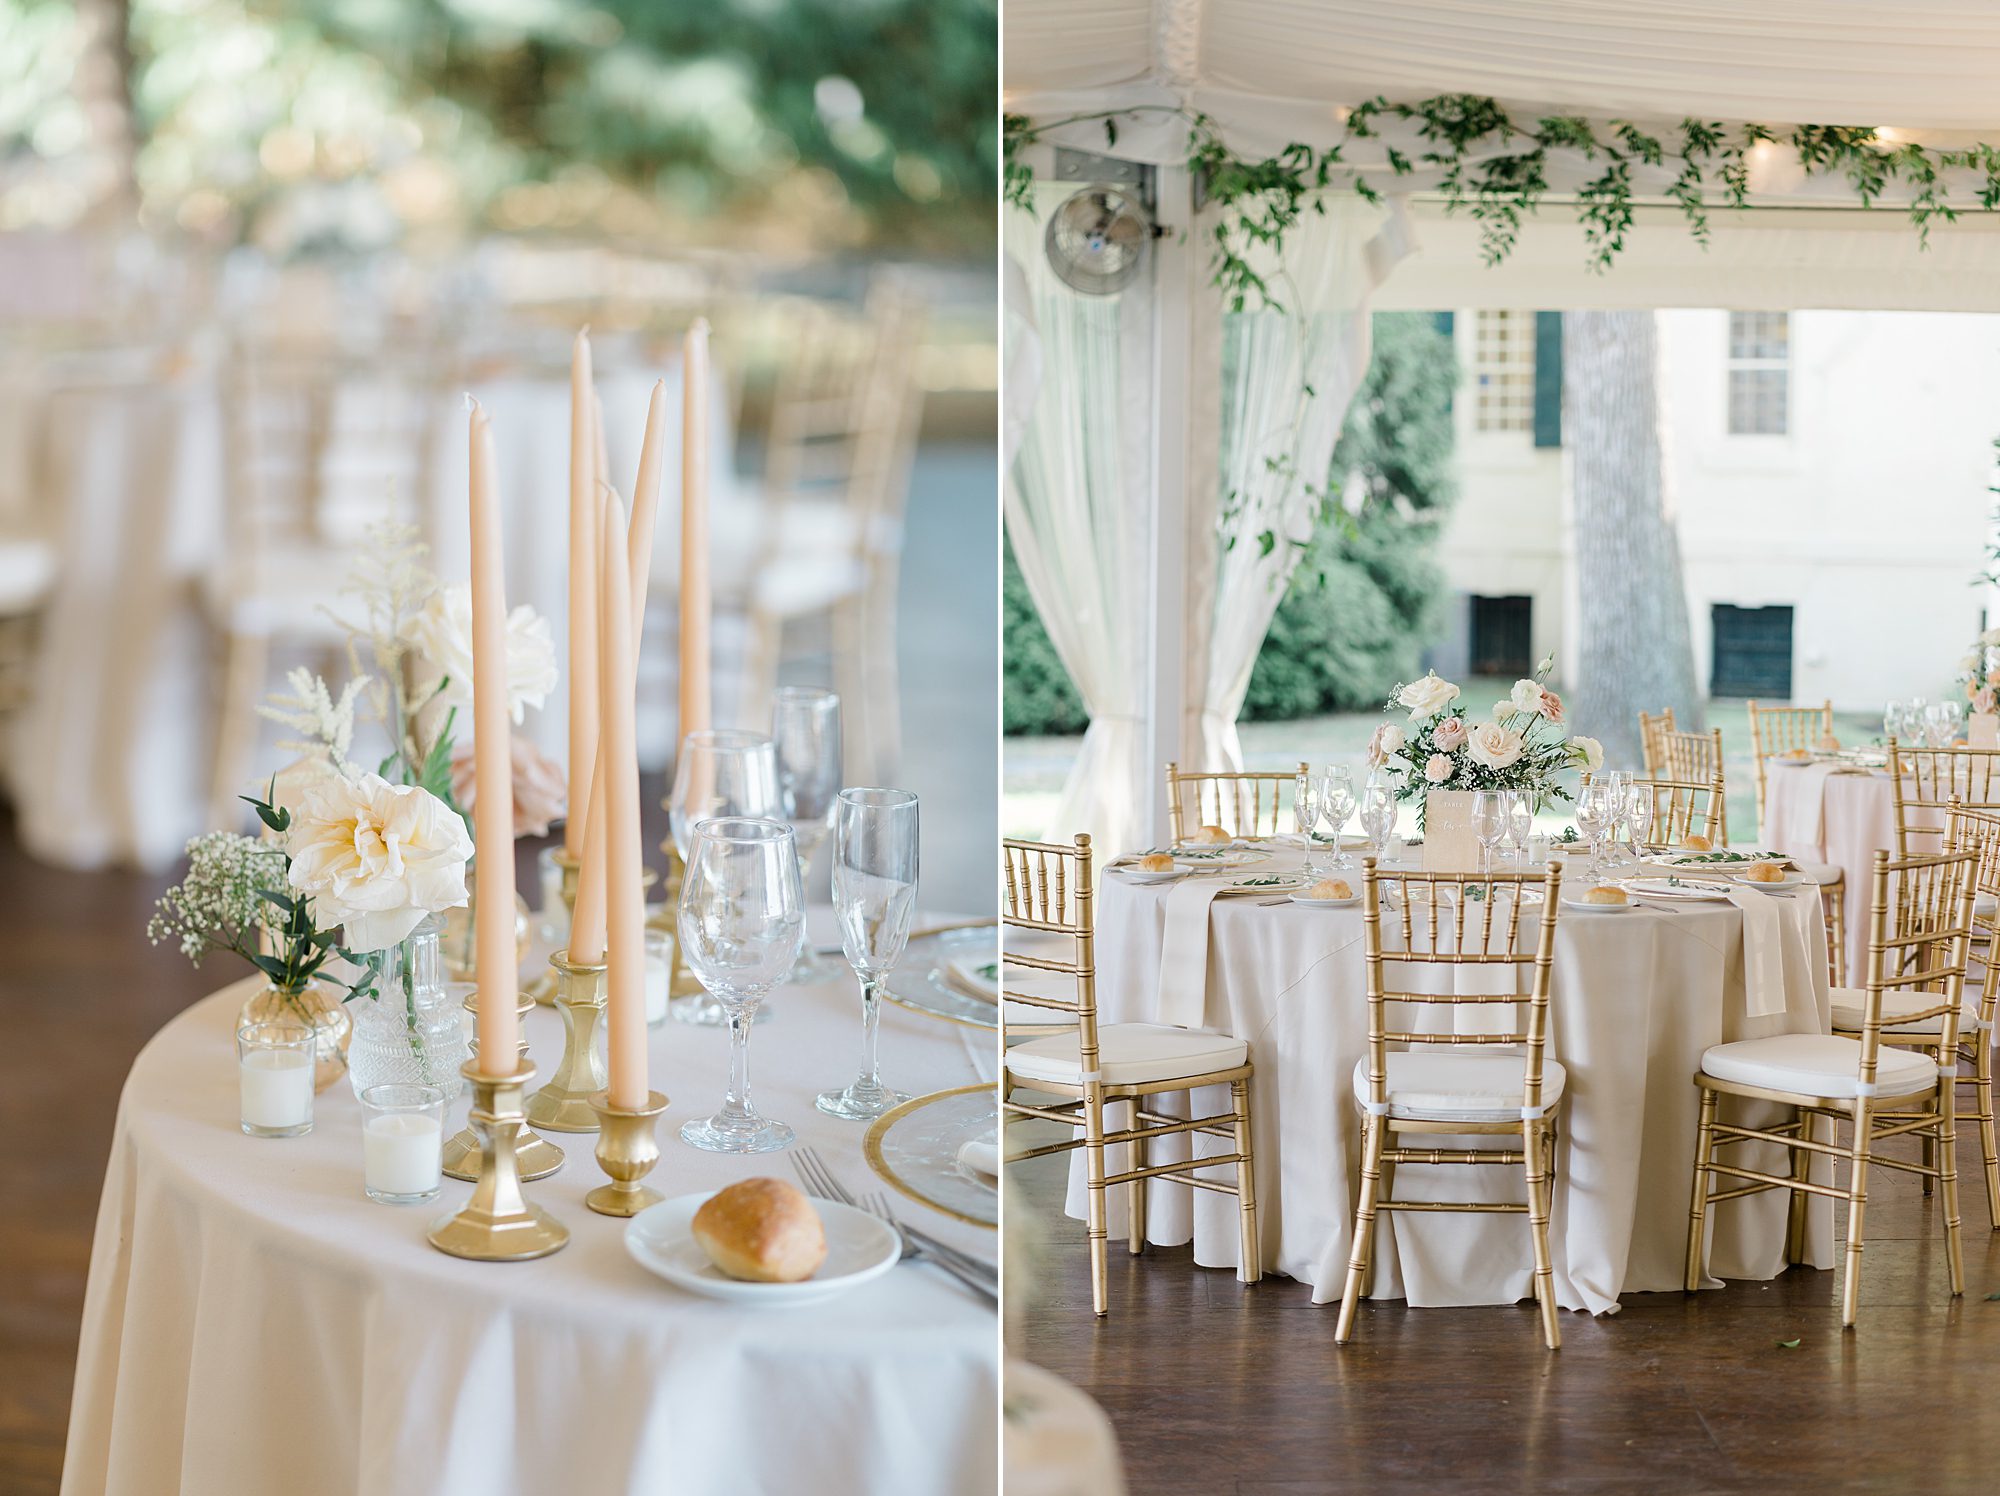 table settings and details at Timeless Waterfront Wedding reception at Glen Foerd on the Delaware